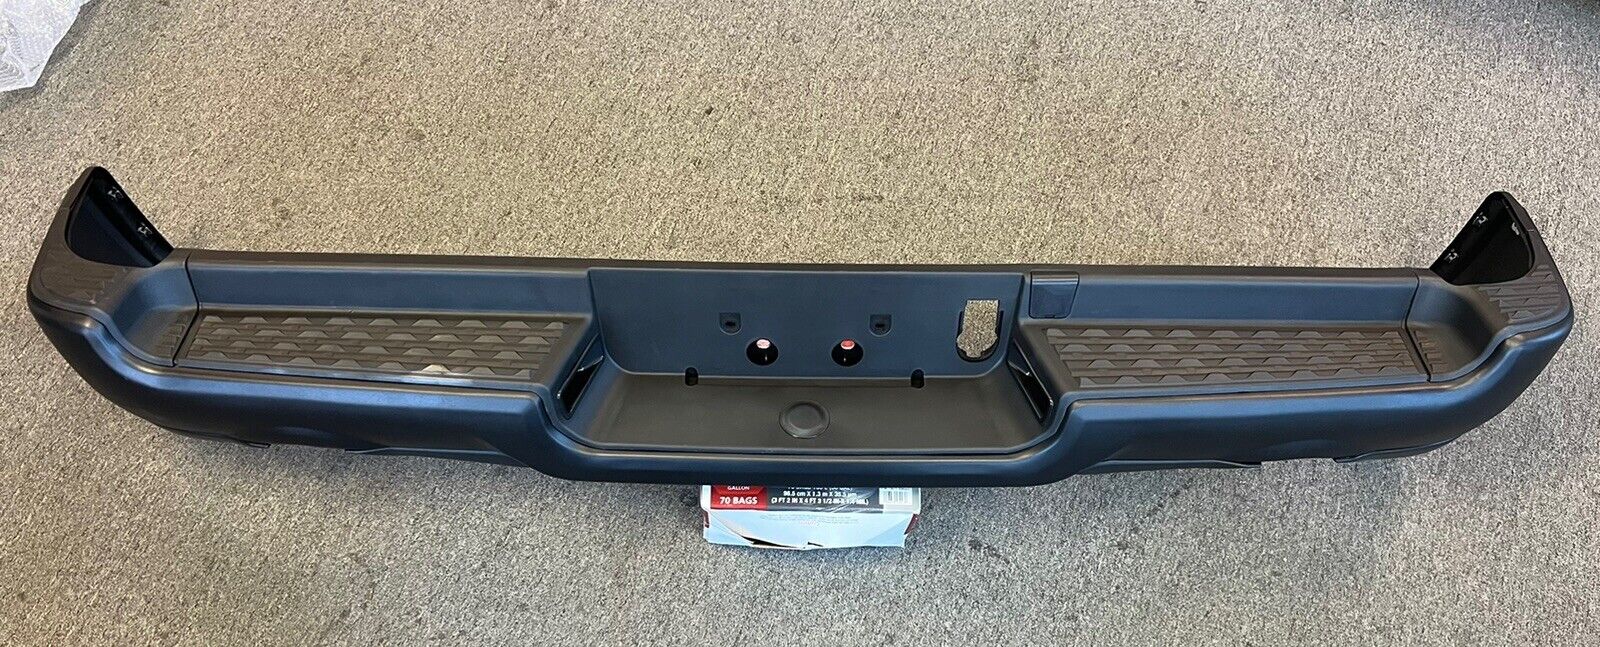 19-23 Dodge Ram 1500 Rear Bumper Cover Panel Assembly 2019 2020 2021 2022 2023